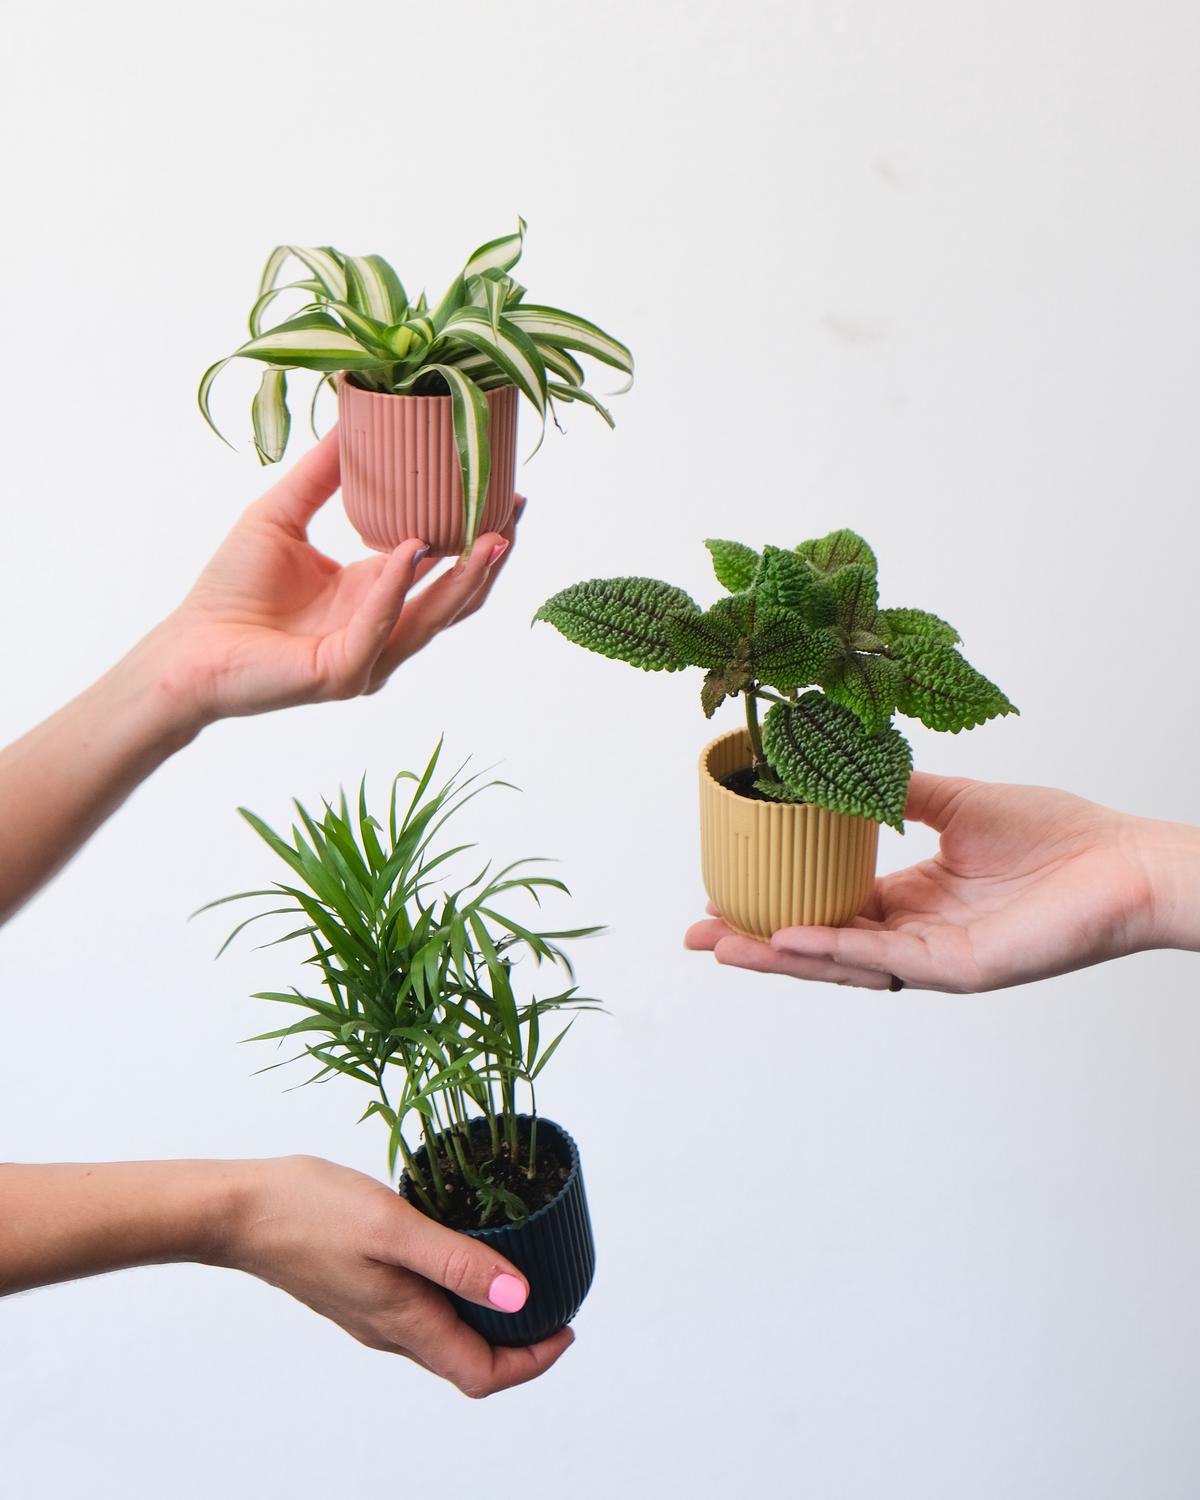 An image of several hands holding up green plants, symbolizing the positive impact of impact investing.